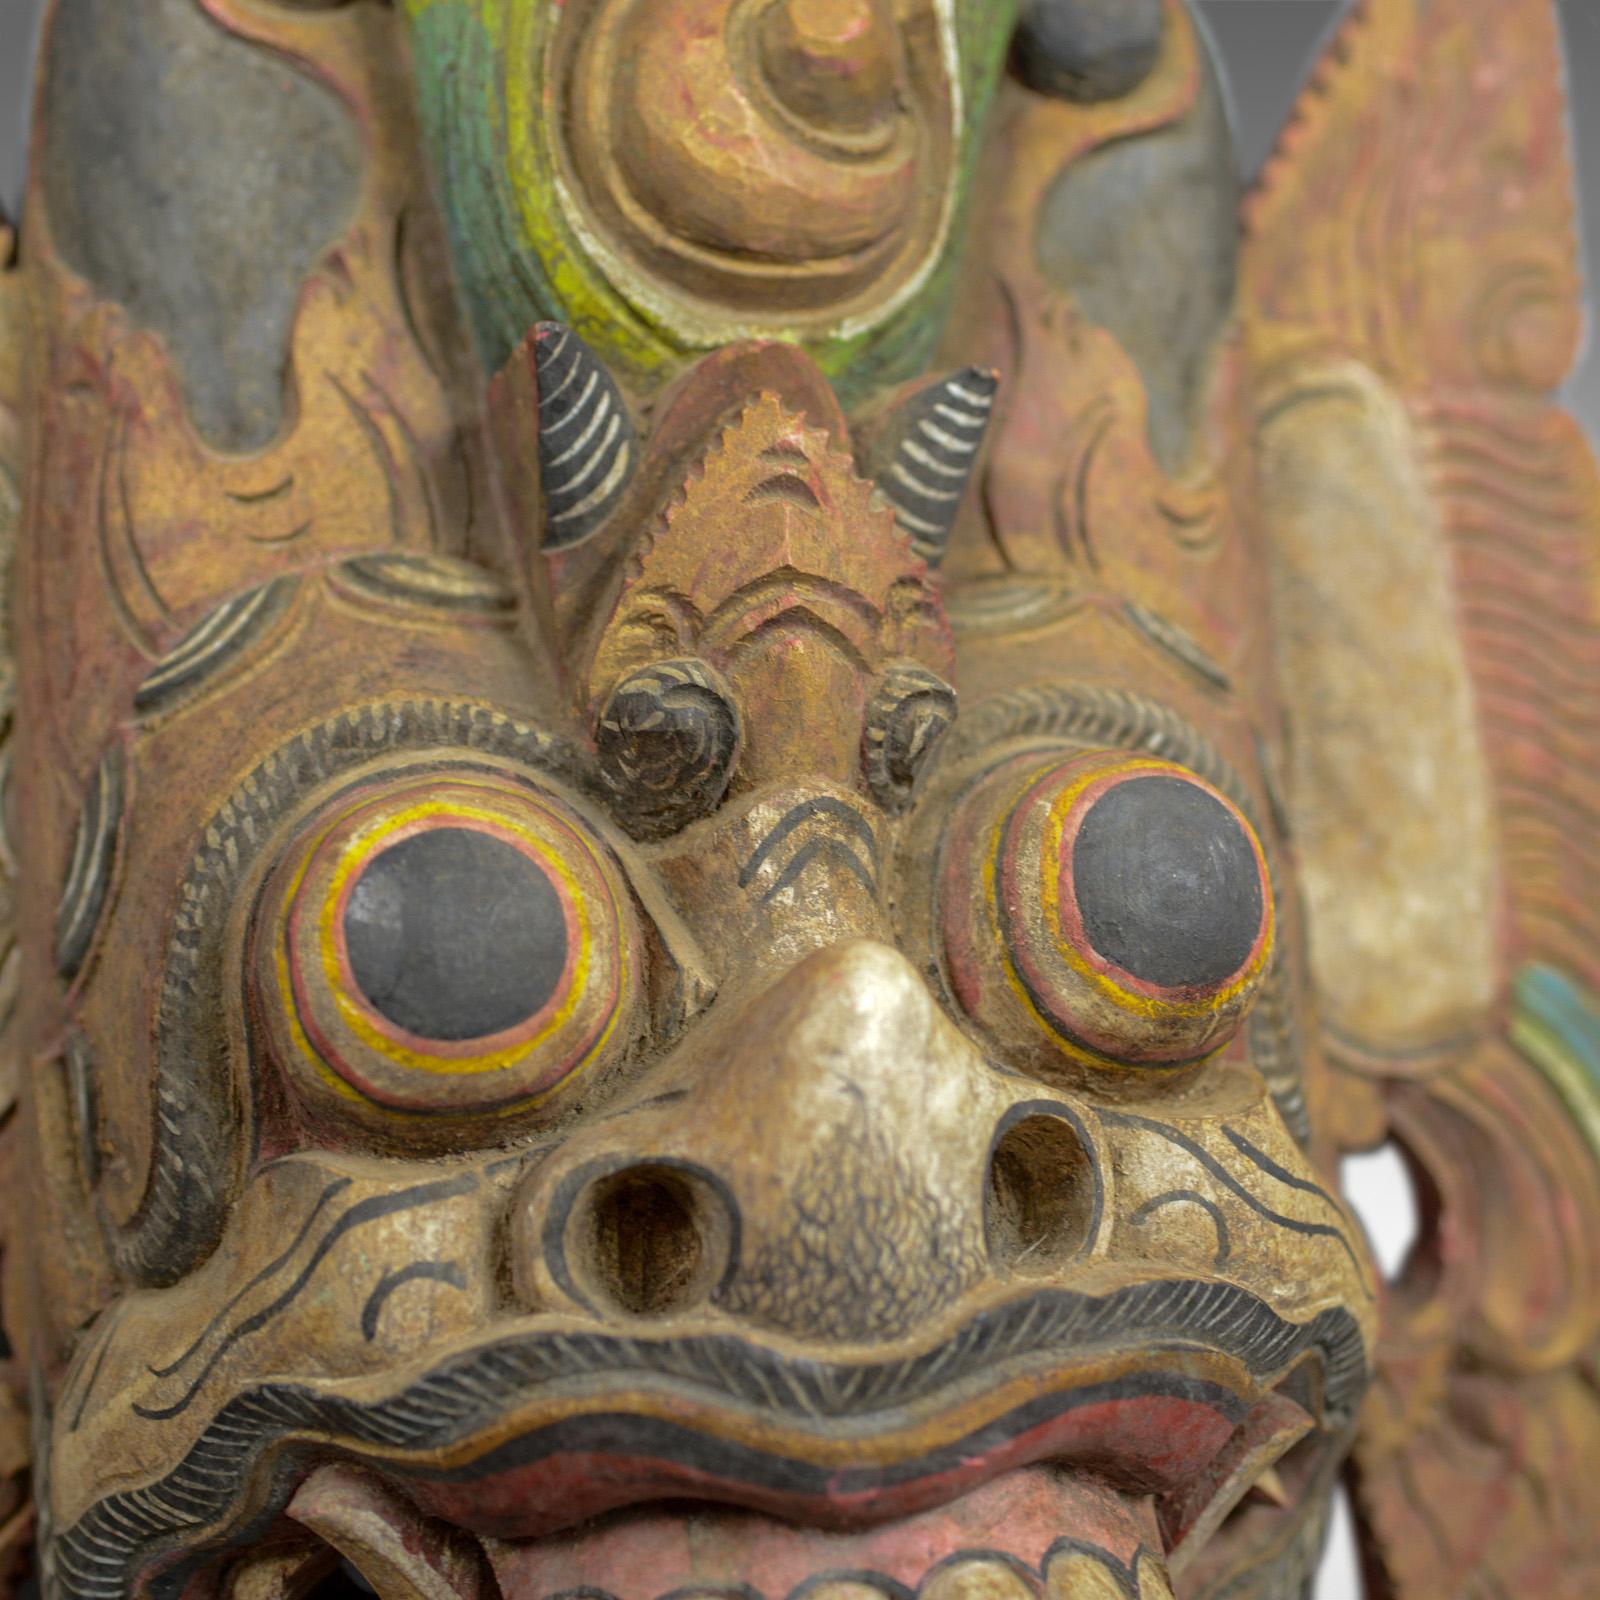 Asian Balinese Barong Carved Mask, Decorative, Painted, Wooden Face, Wall Art, C20th